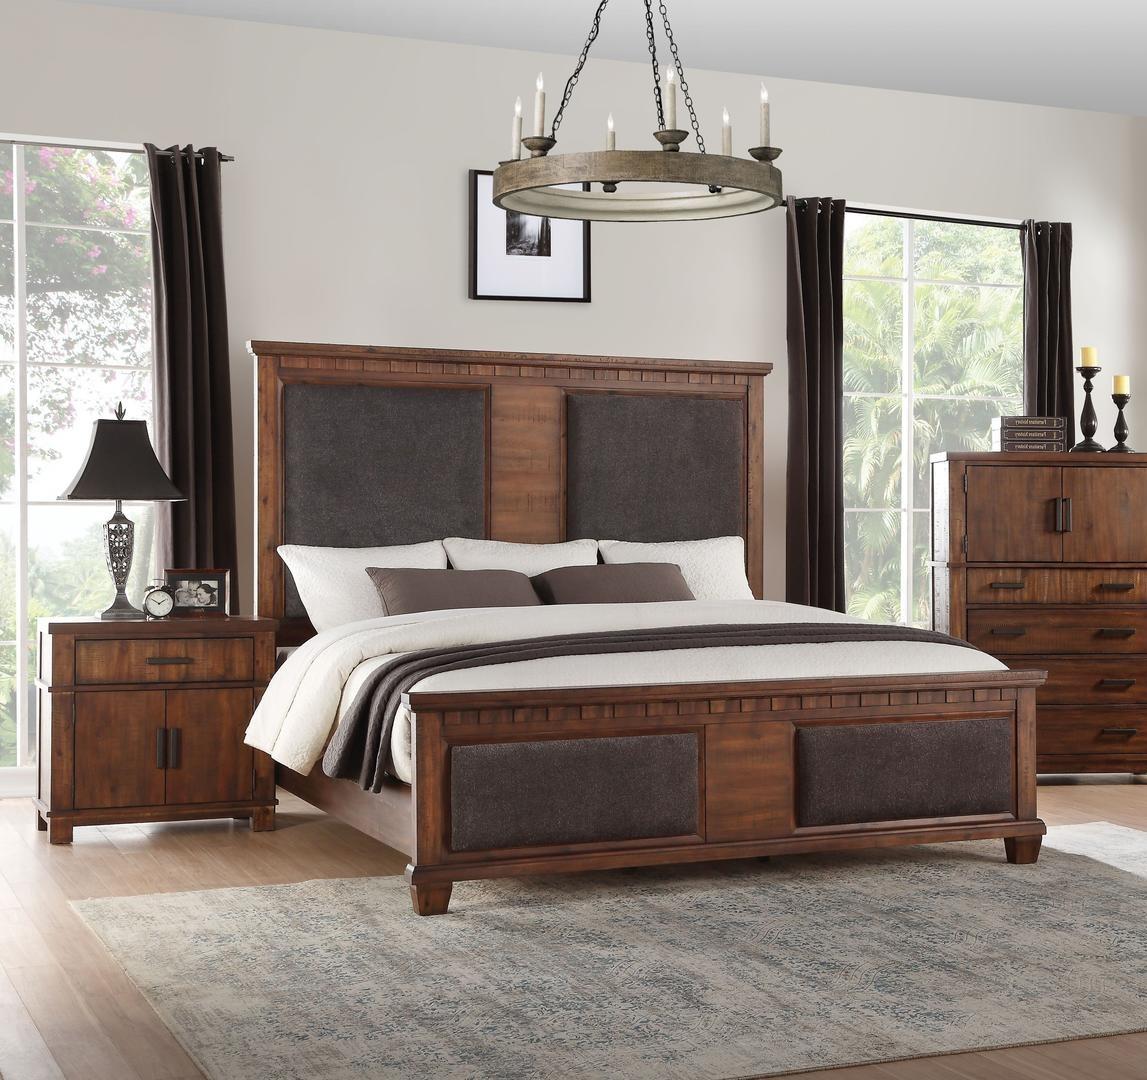 Classic, Traditional Panel Bedroom Set Vibia Vibia-27160Q-Set-3 in Cherry Finish, Brown Fabric